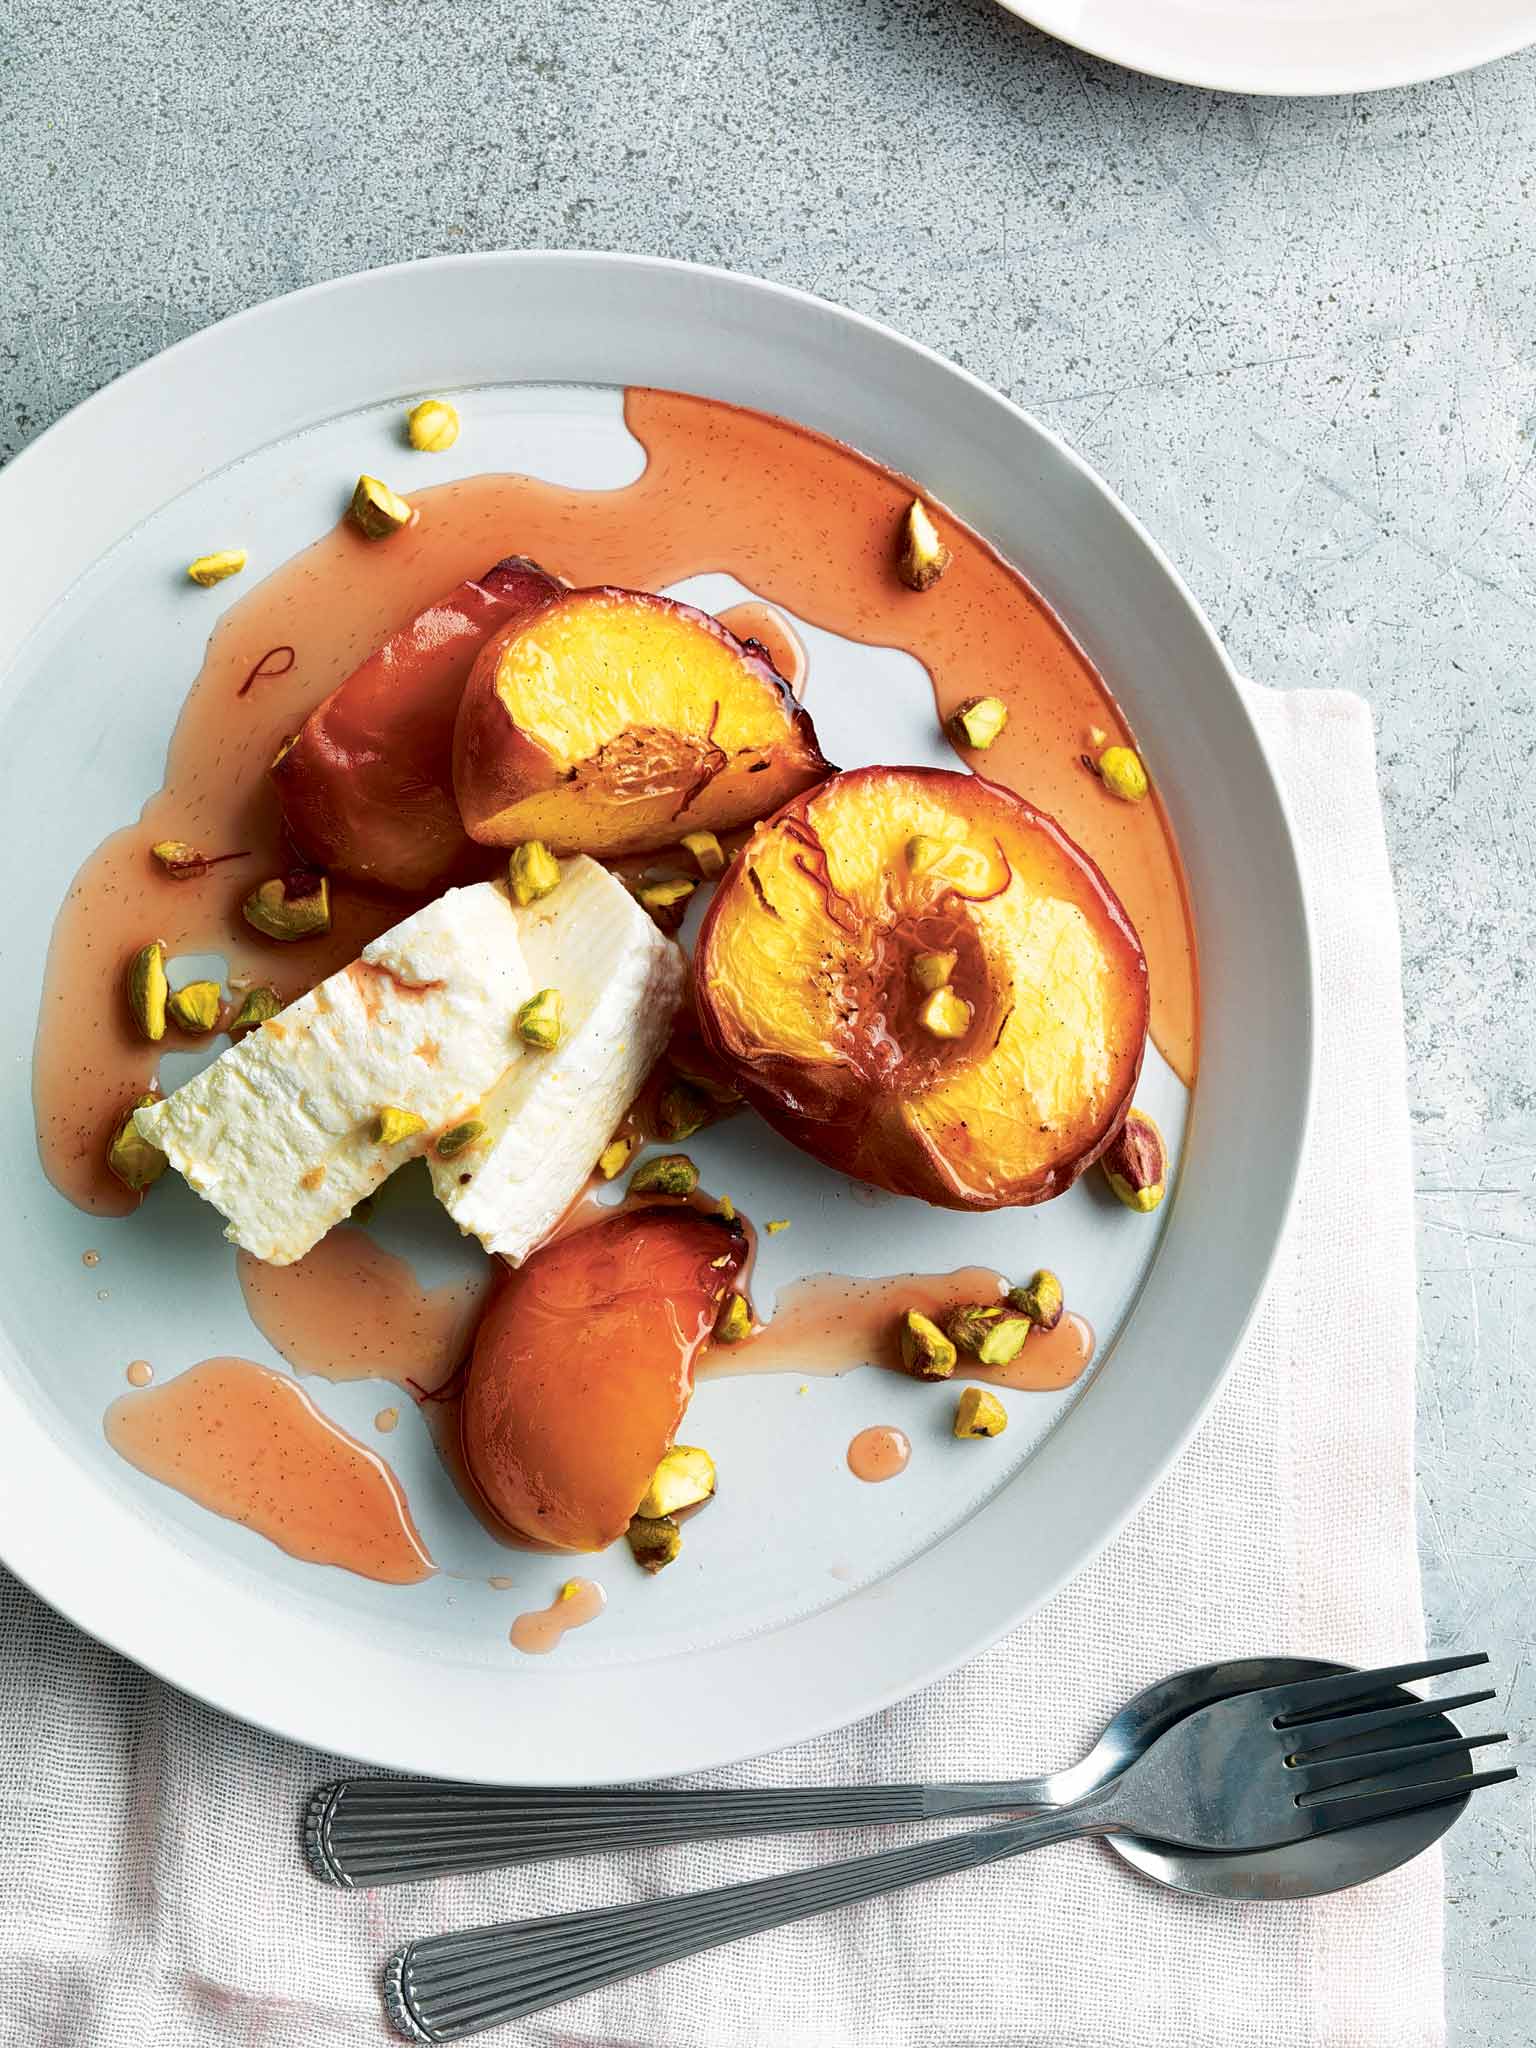 Saffron-roasted peaches with ricotta and pistachios